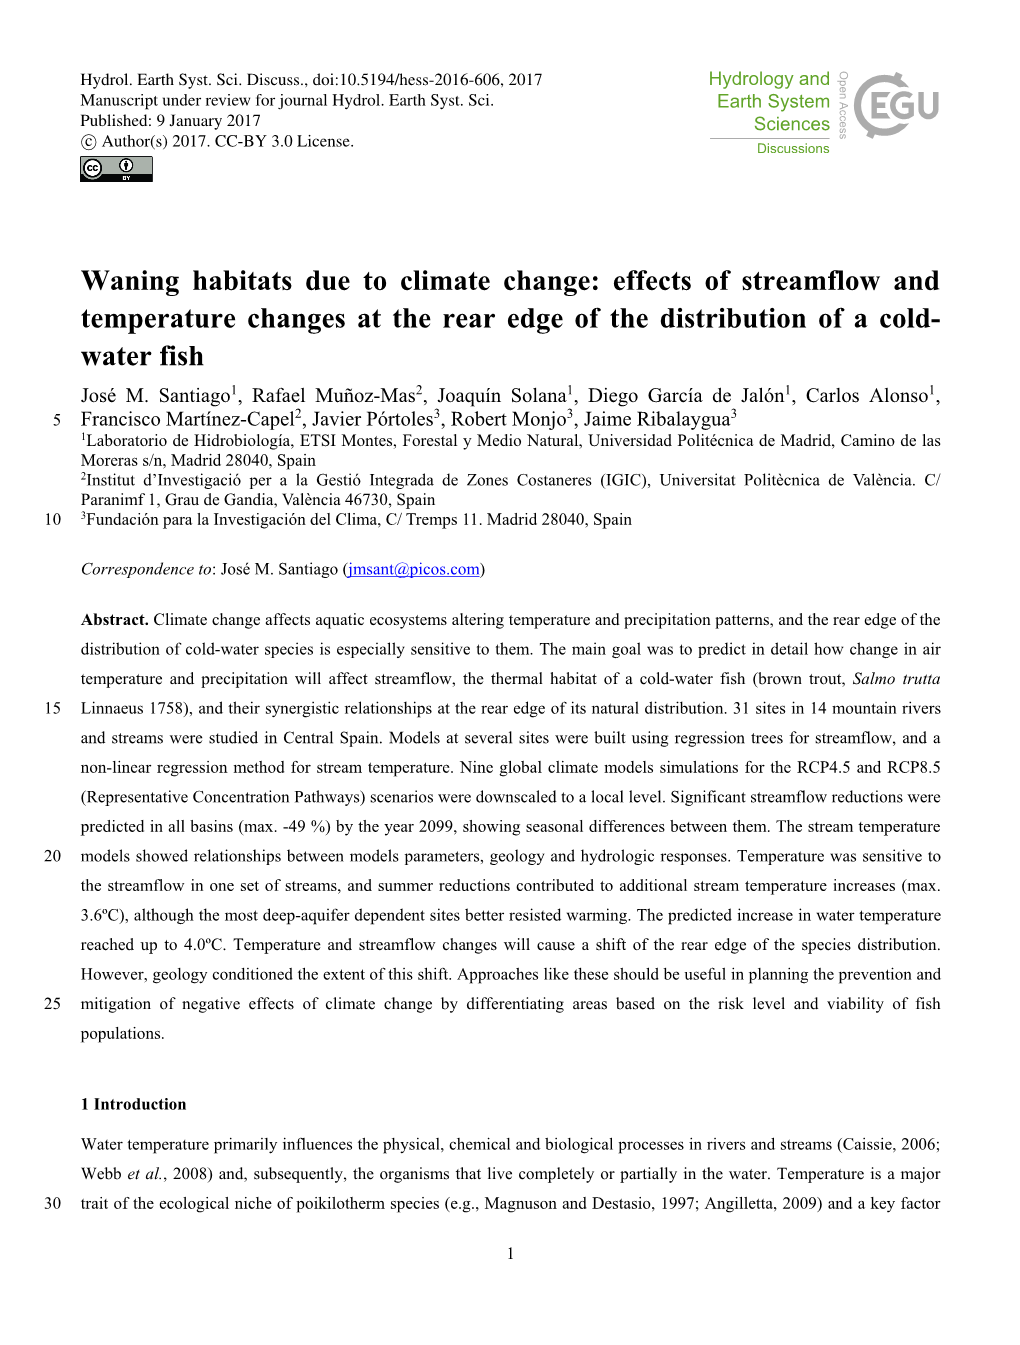 Waning Habitats Due to Climate Change: Effects of Streamflow and Temperature Changes at the Rear Edge of the Distribution of a Cold- Water Fish José M